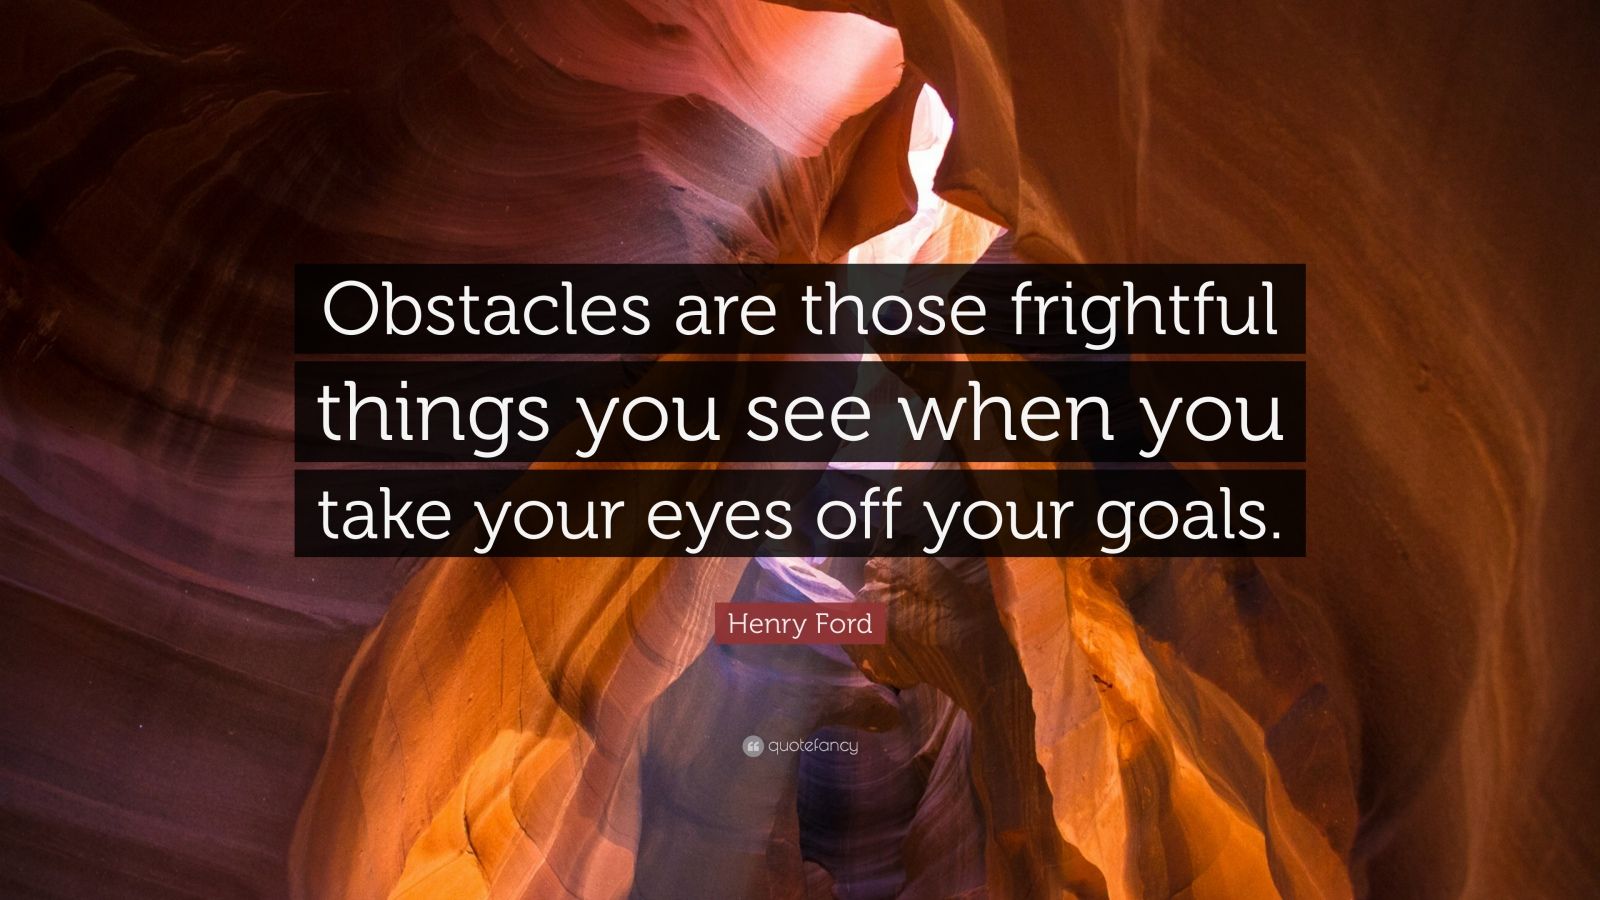 Henry ford quote on obstacles #5